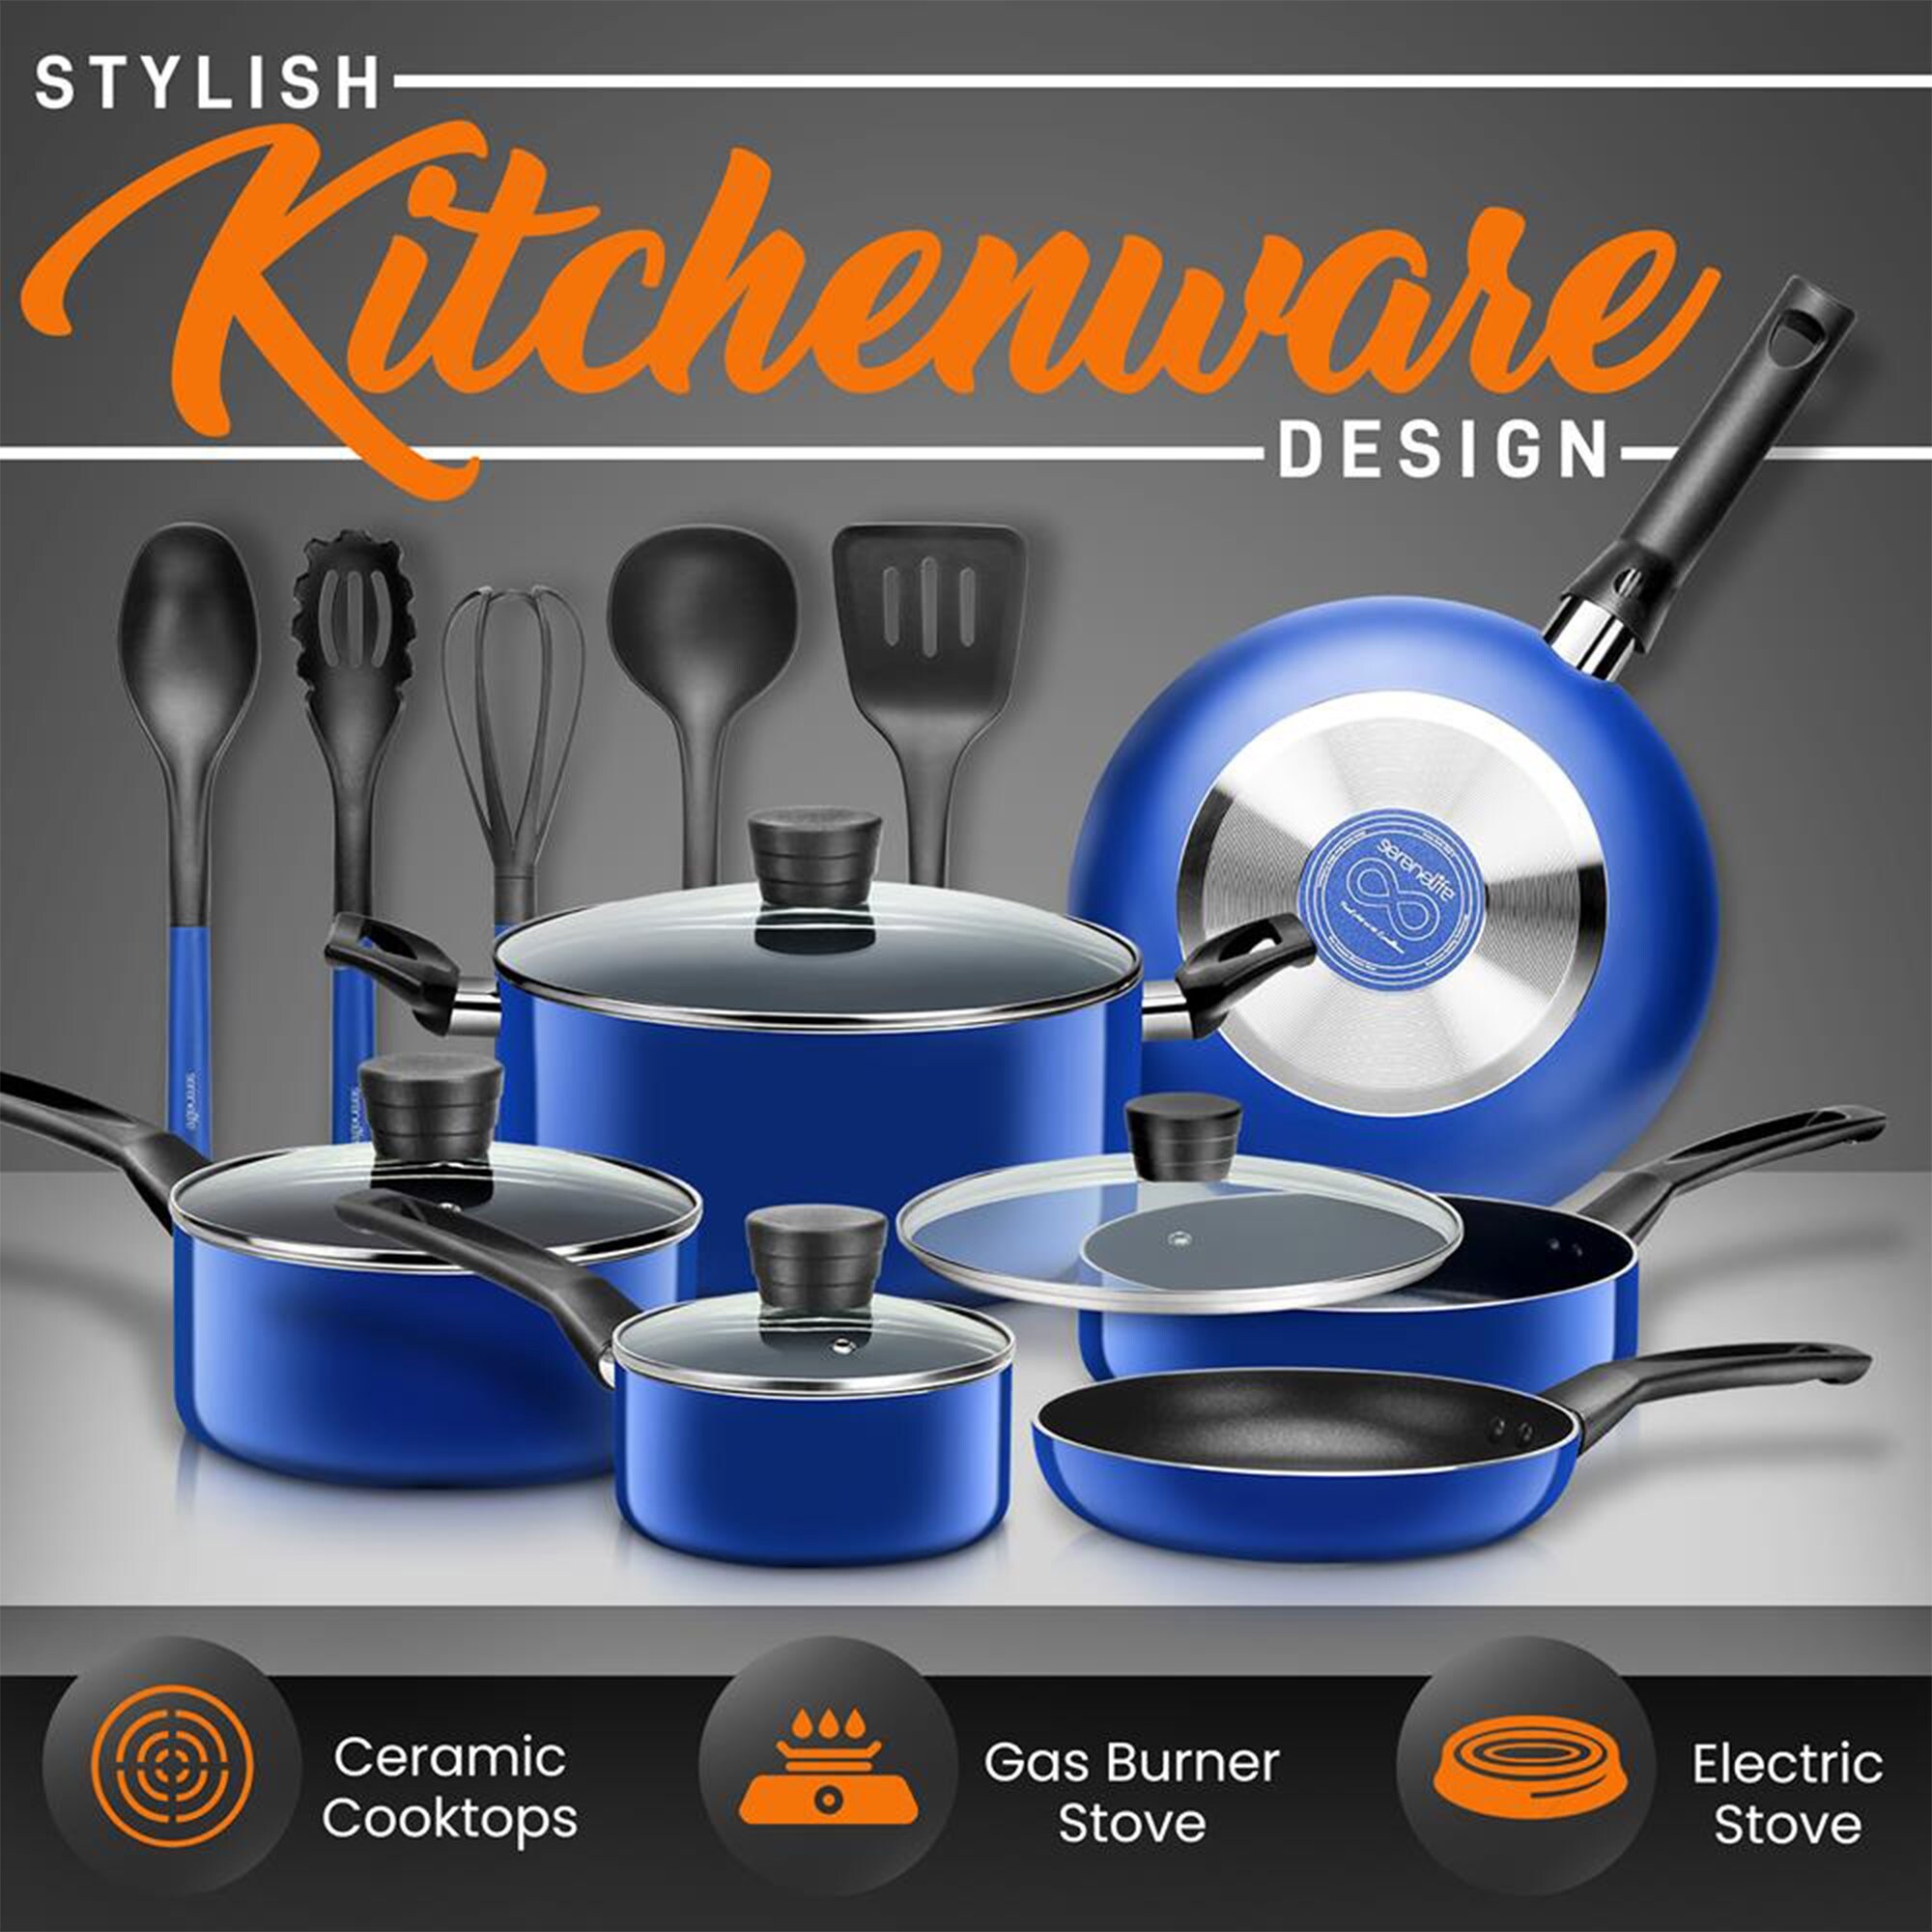 https://ak1.ostkcdn.com/images/products/is/images/direct/67eeedd1dc83ac560241e465bab2c3aeed6a6ffa/SereneLife-15-Piece-Pots-and-Pans-Non-Stick-Chef-Kitchenware-Cookware-Set%2C-Blue.jpg